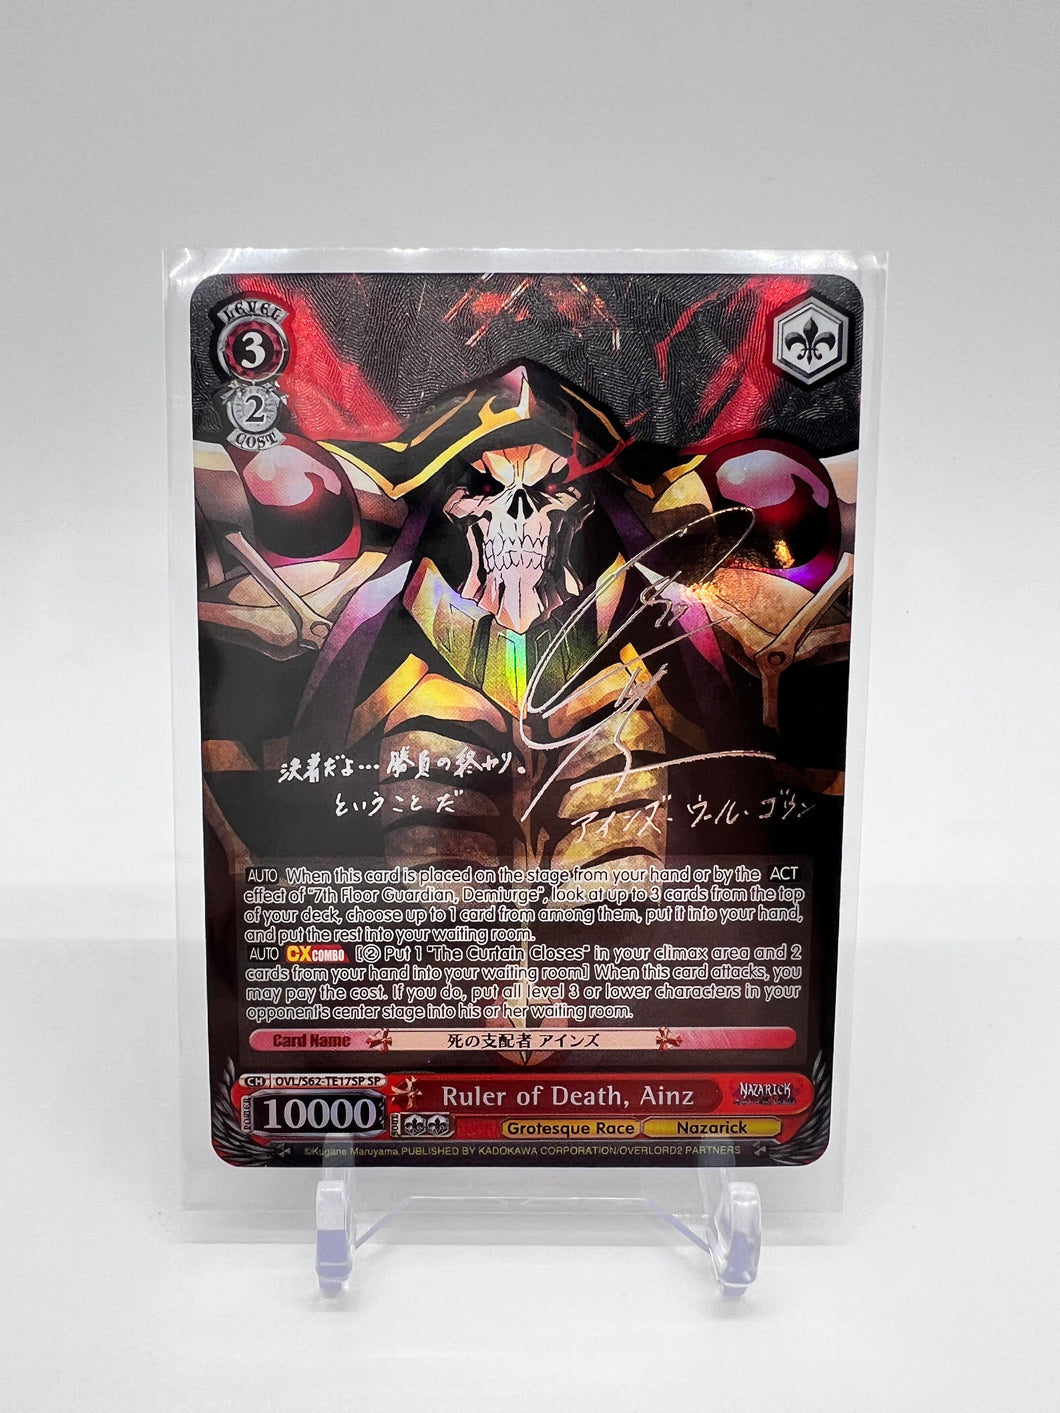 Single - Ainz, Ruler of Death Trial Deck SP, Nazarick: Tomb of the Undead (Overlord), Weiss Schwarz